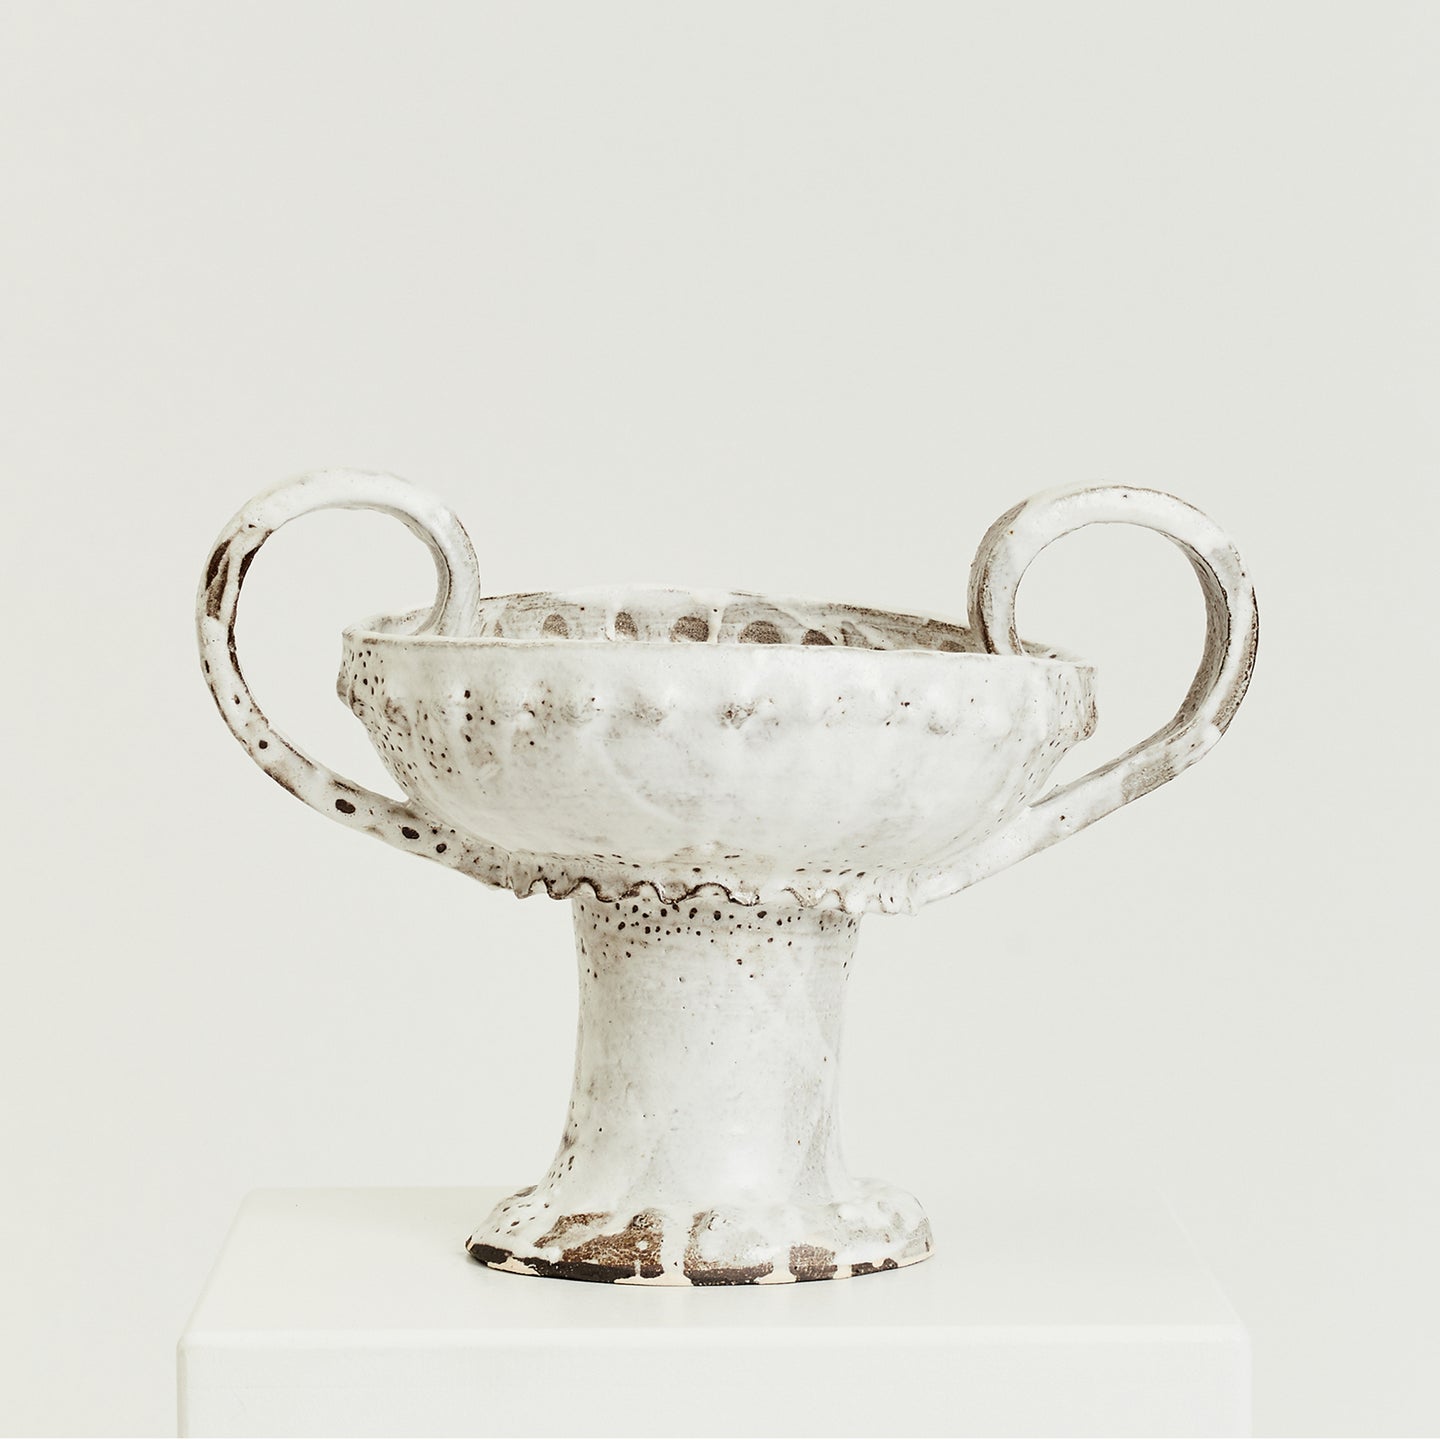 Liz Wilson small ceramic trophy - HIRE ONLY